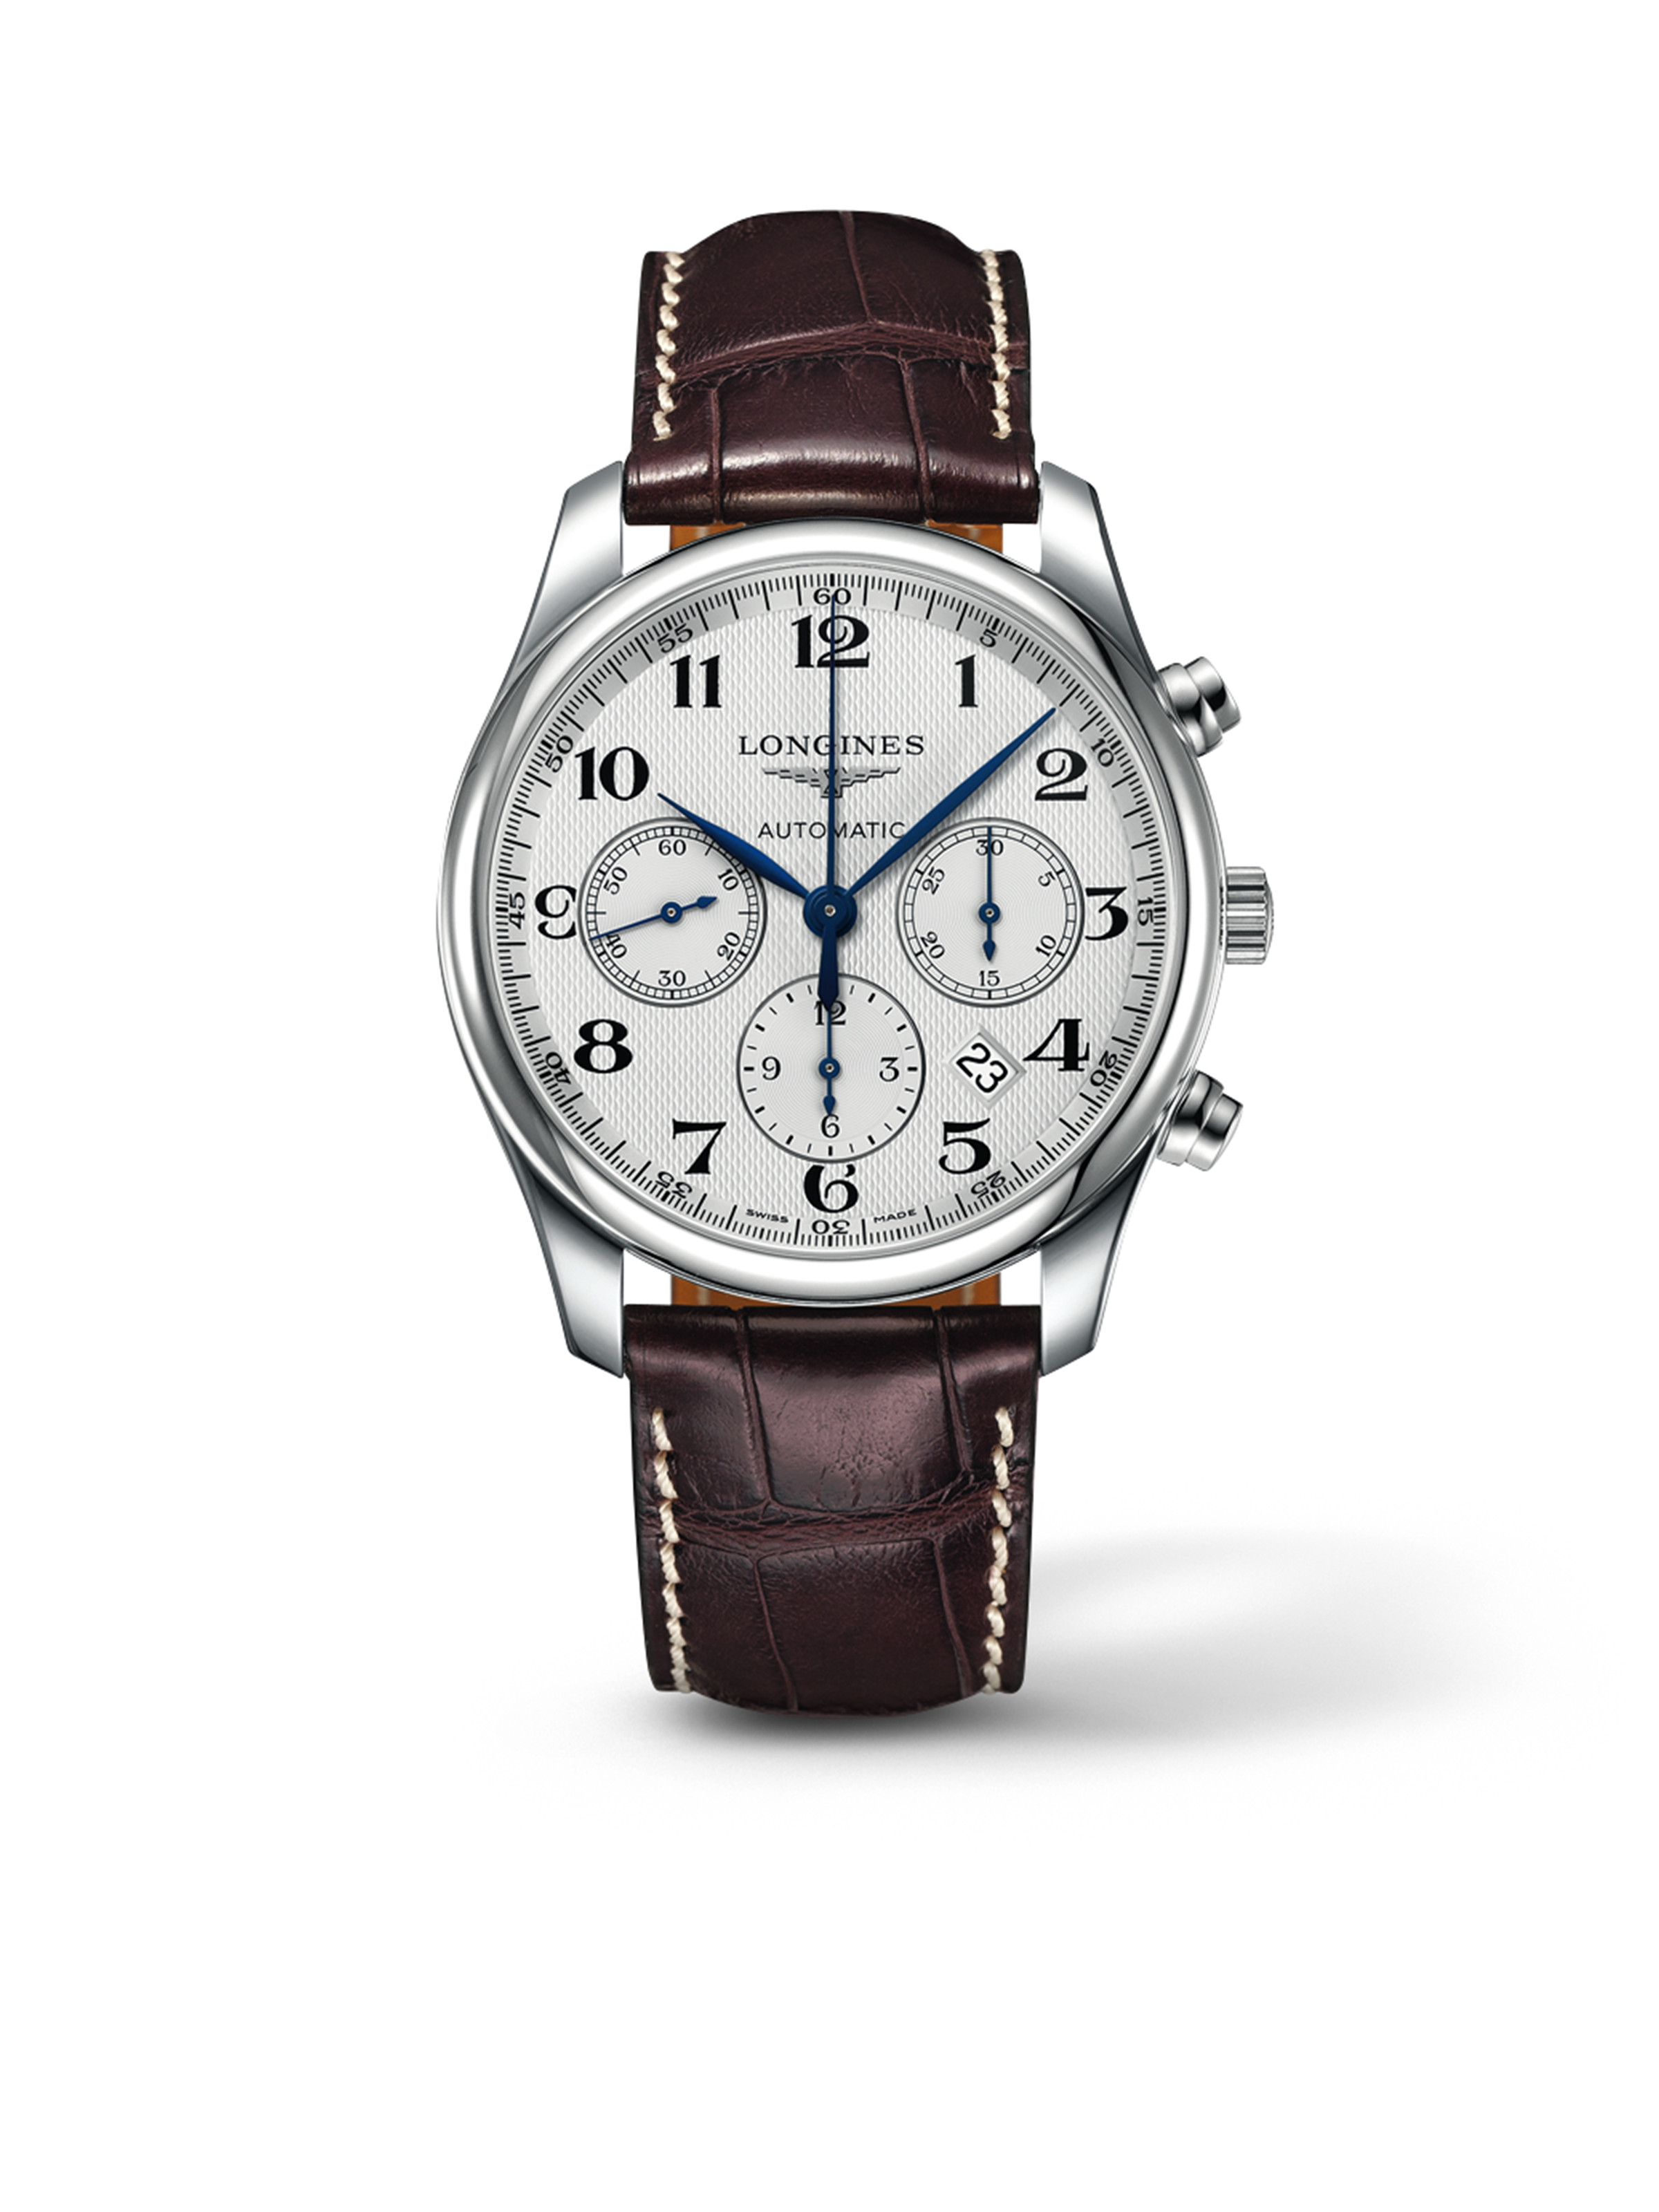 The Longines Master Collection | Longines | Wempe Jewelers